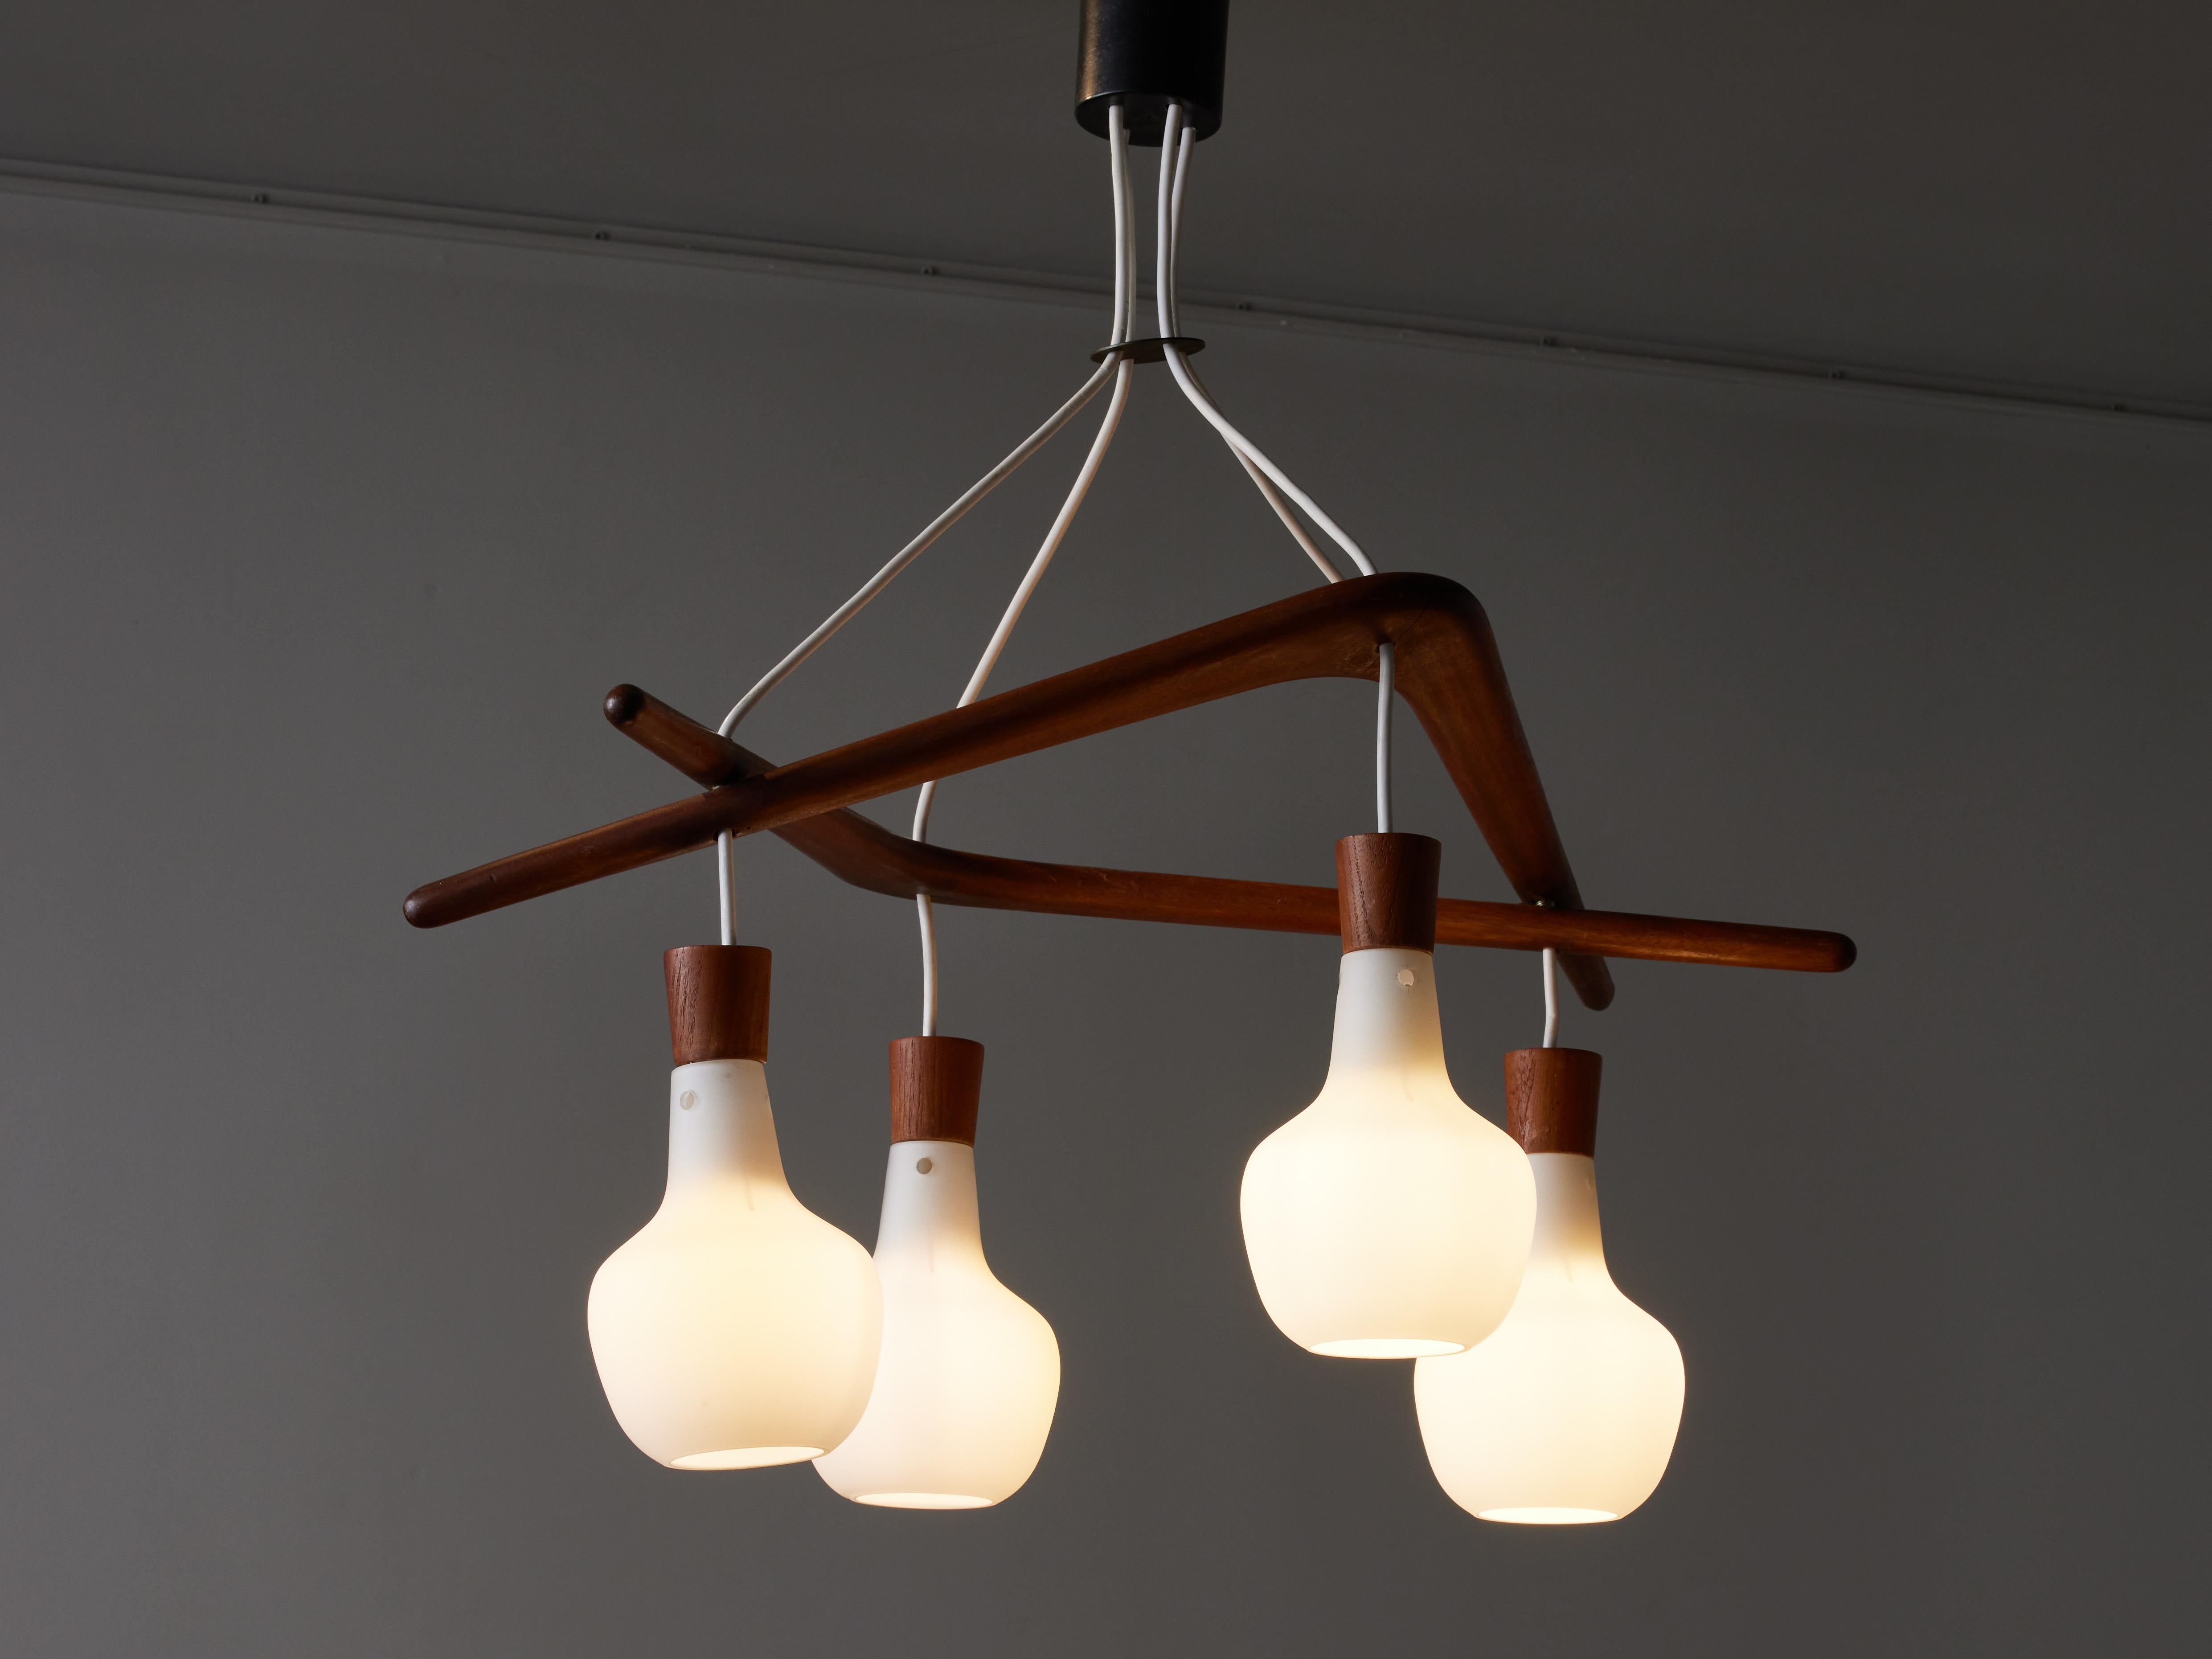 Boomerang chandelier by Rispal.

Chandelier made of two stained wood boomerang spreading four wires from where hang opaline glass shades.

The lighting manufacturer RISPAL was a French lighting brand based in Paris and active from the mid 1920’s to